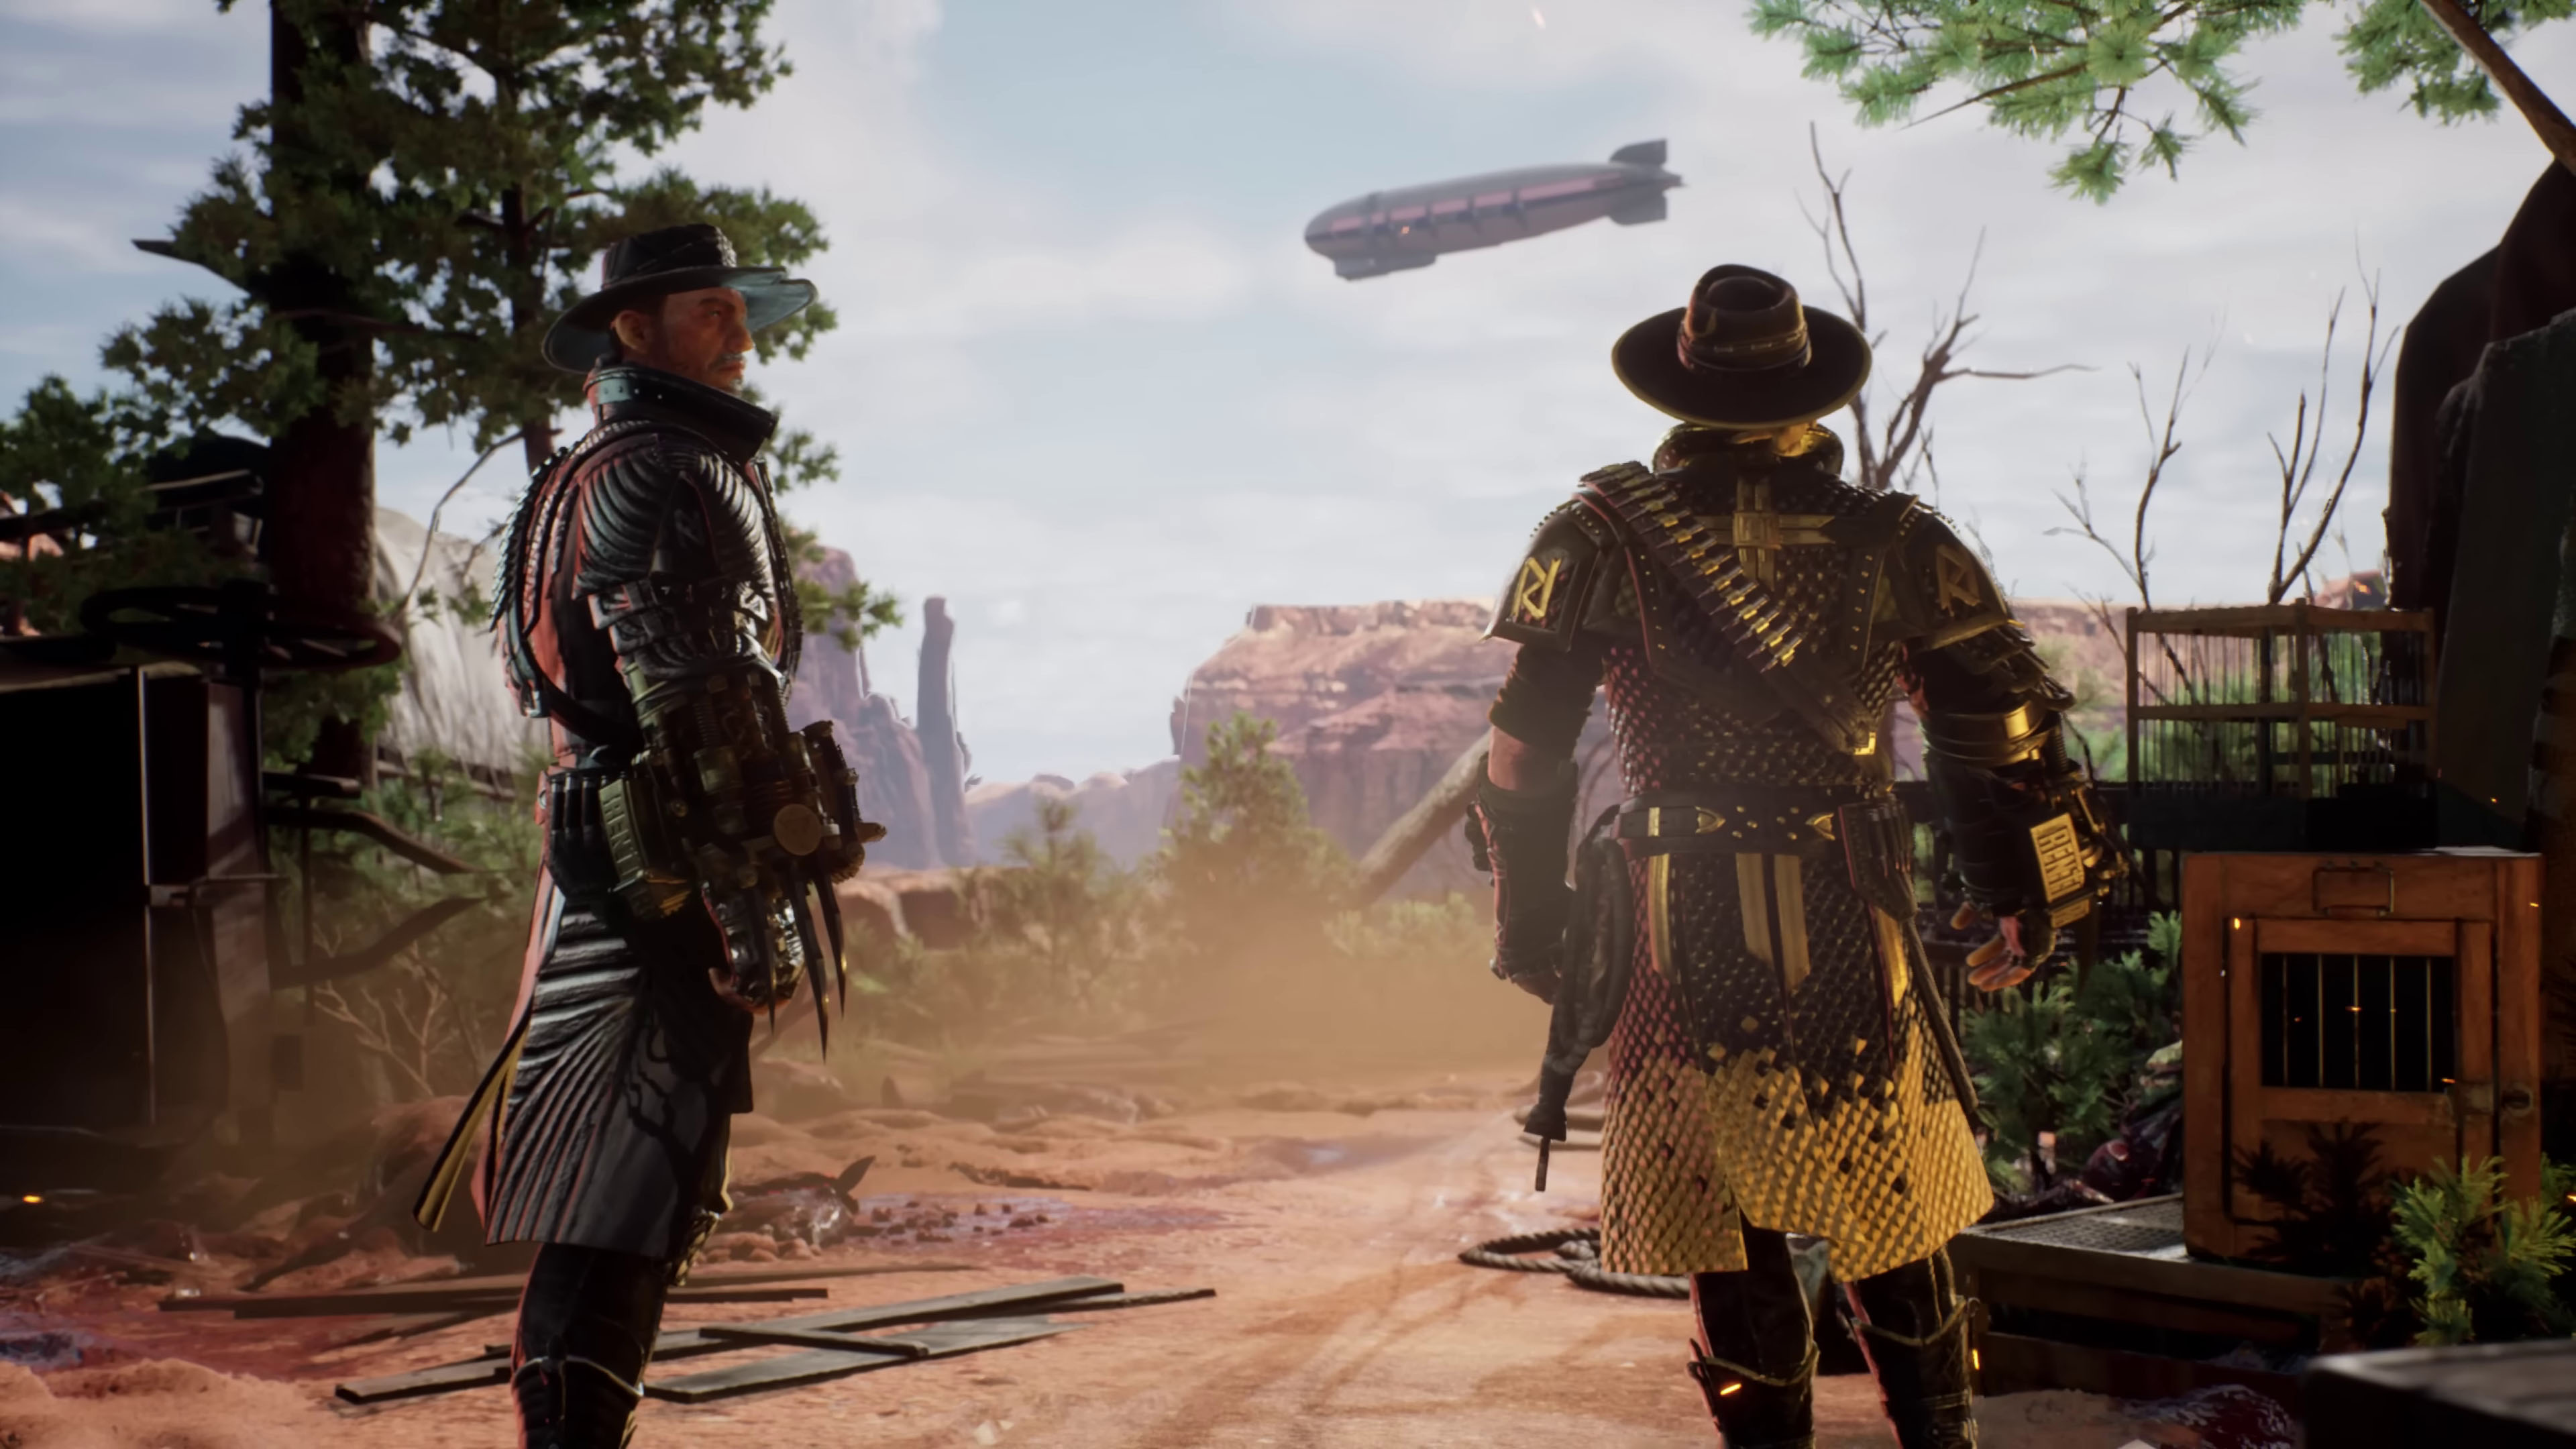 Evil West review – One of the year's best action games let down by outdated  level design